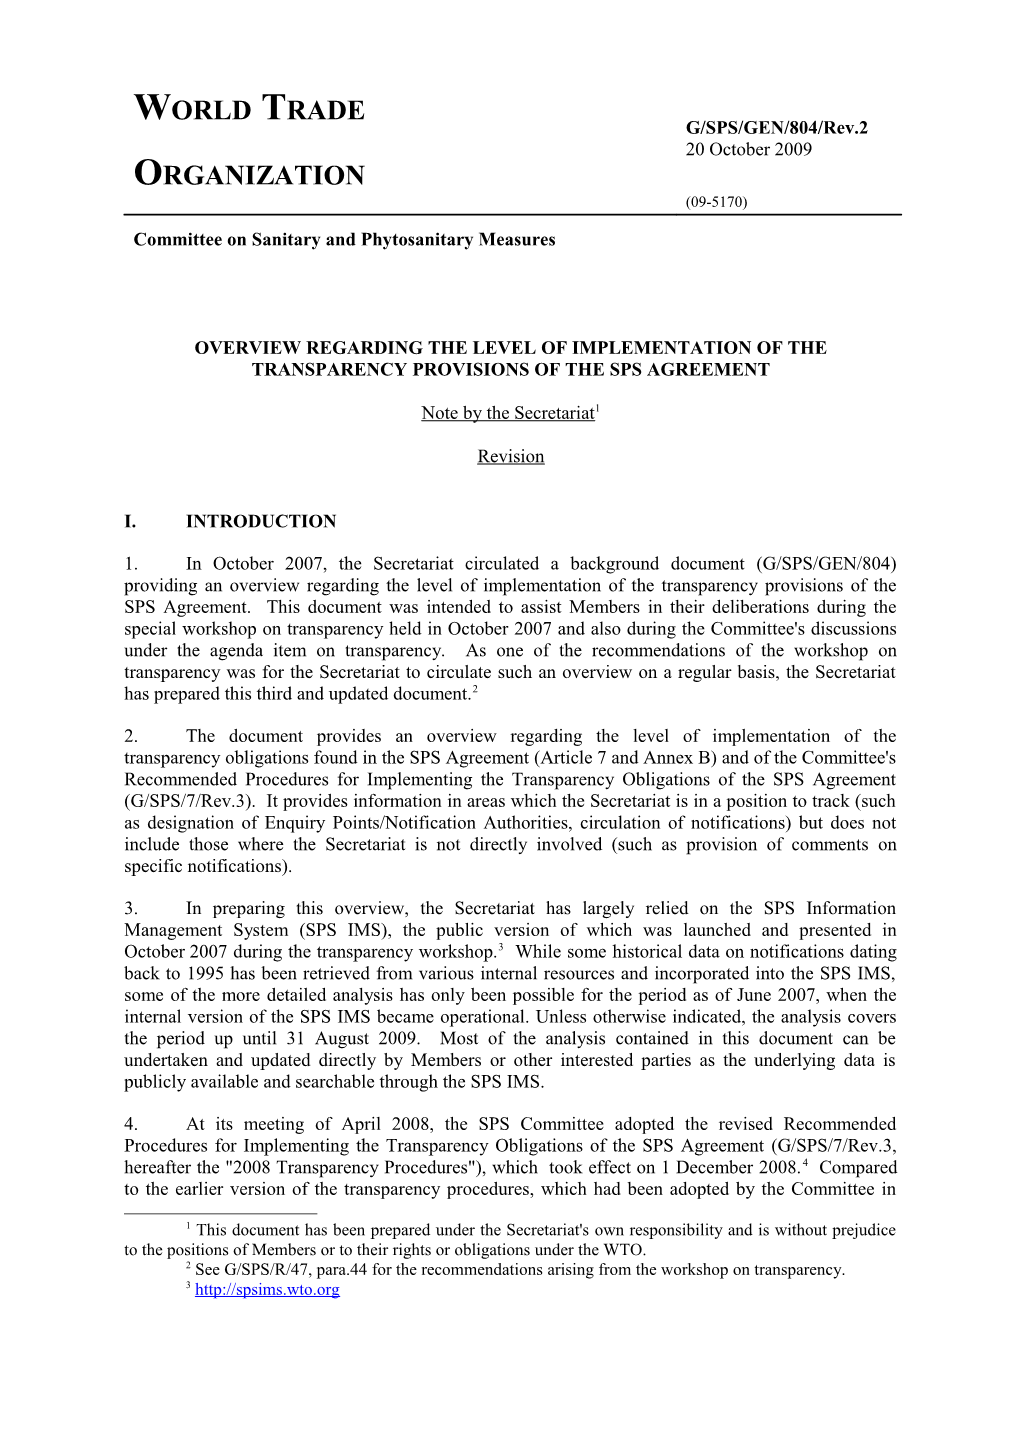 Overview Regarding the Level of Implementation of the Transparency Provisions of the Sps